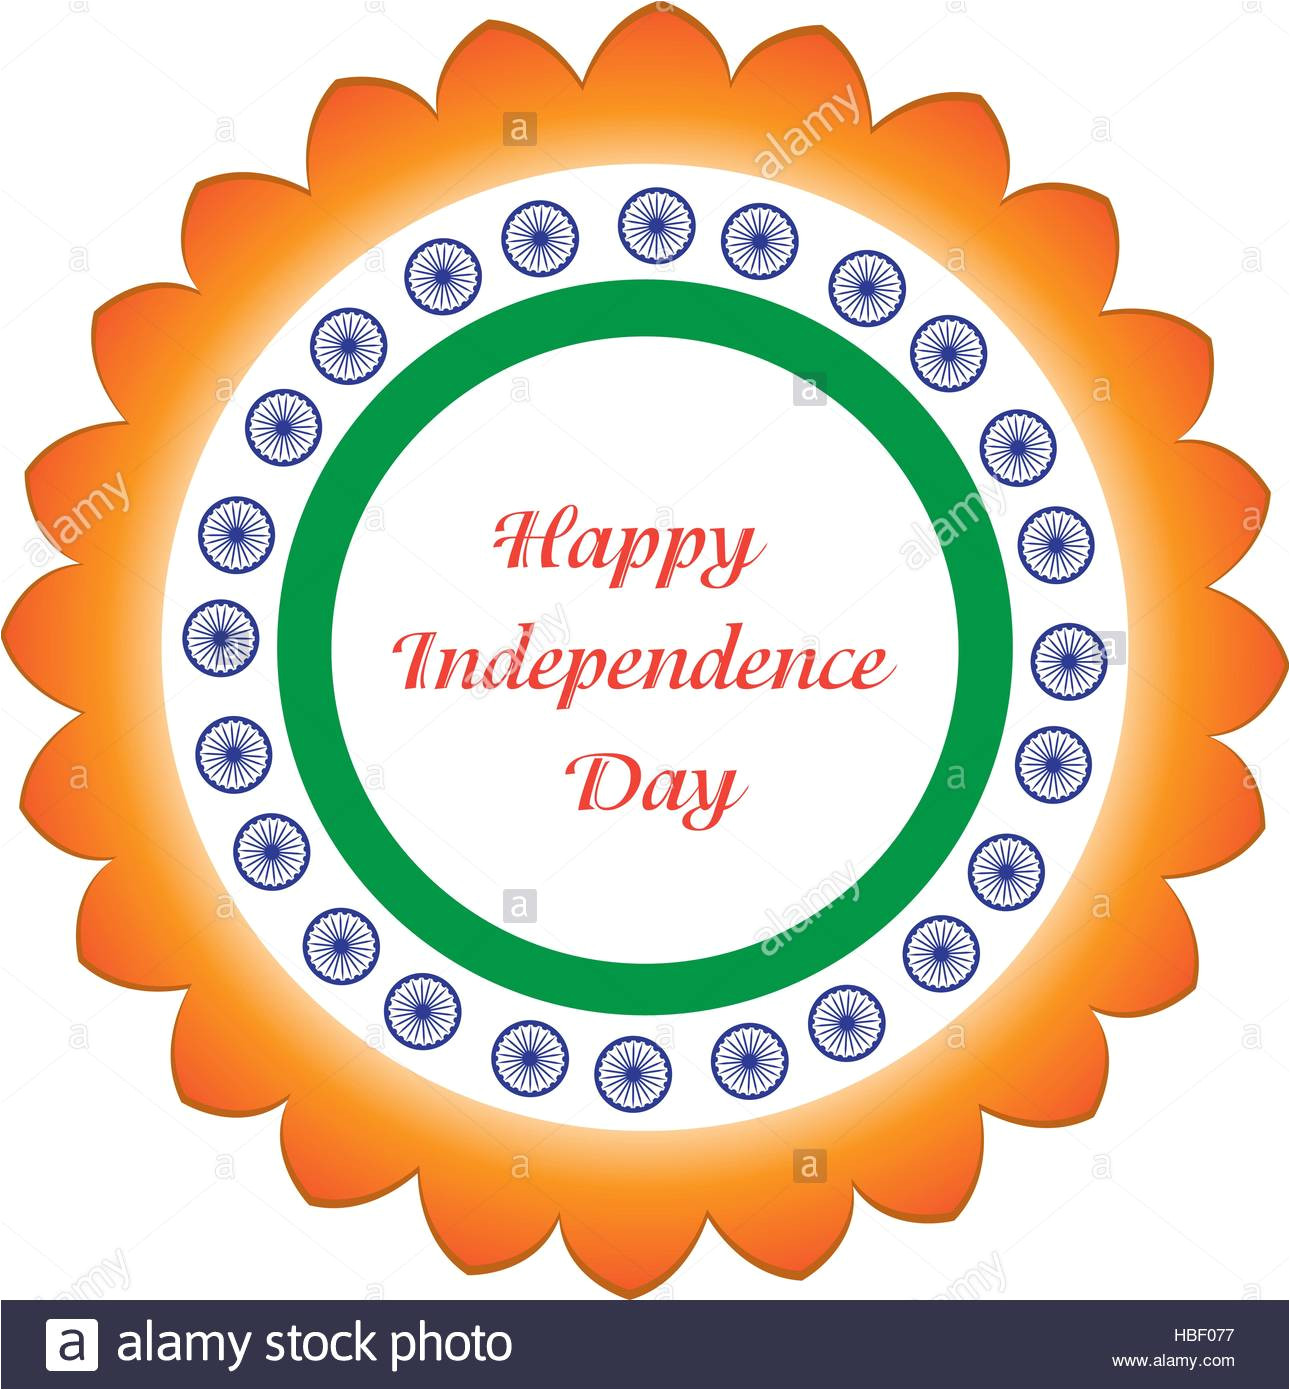 happy india independence day 5 july independence day greeting card hbf077 jpg